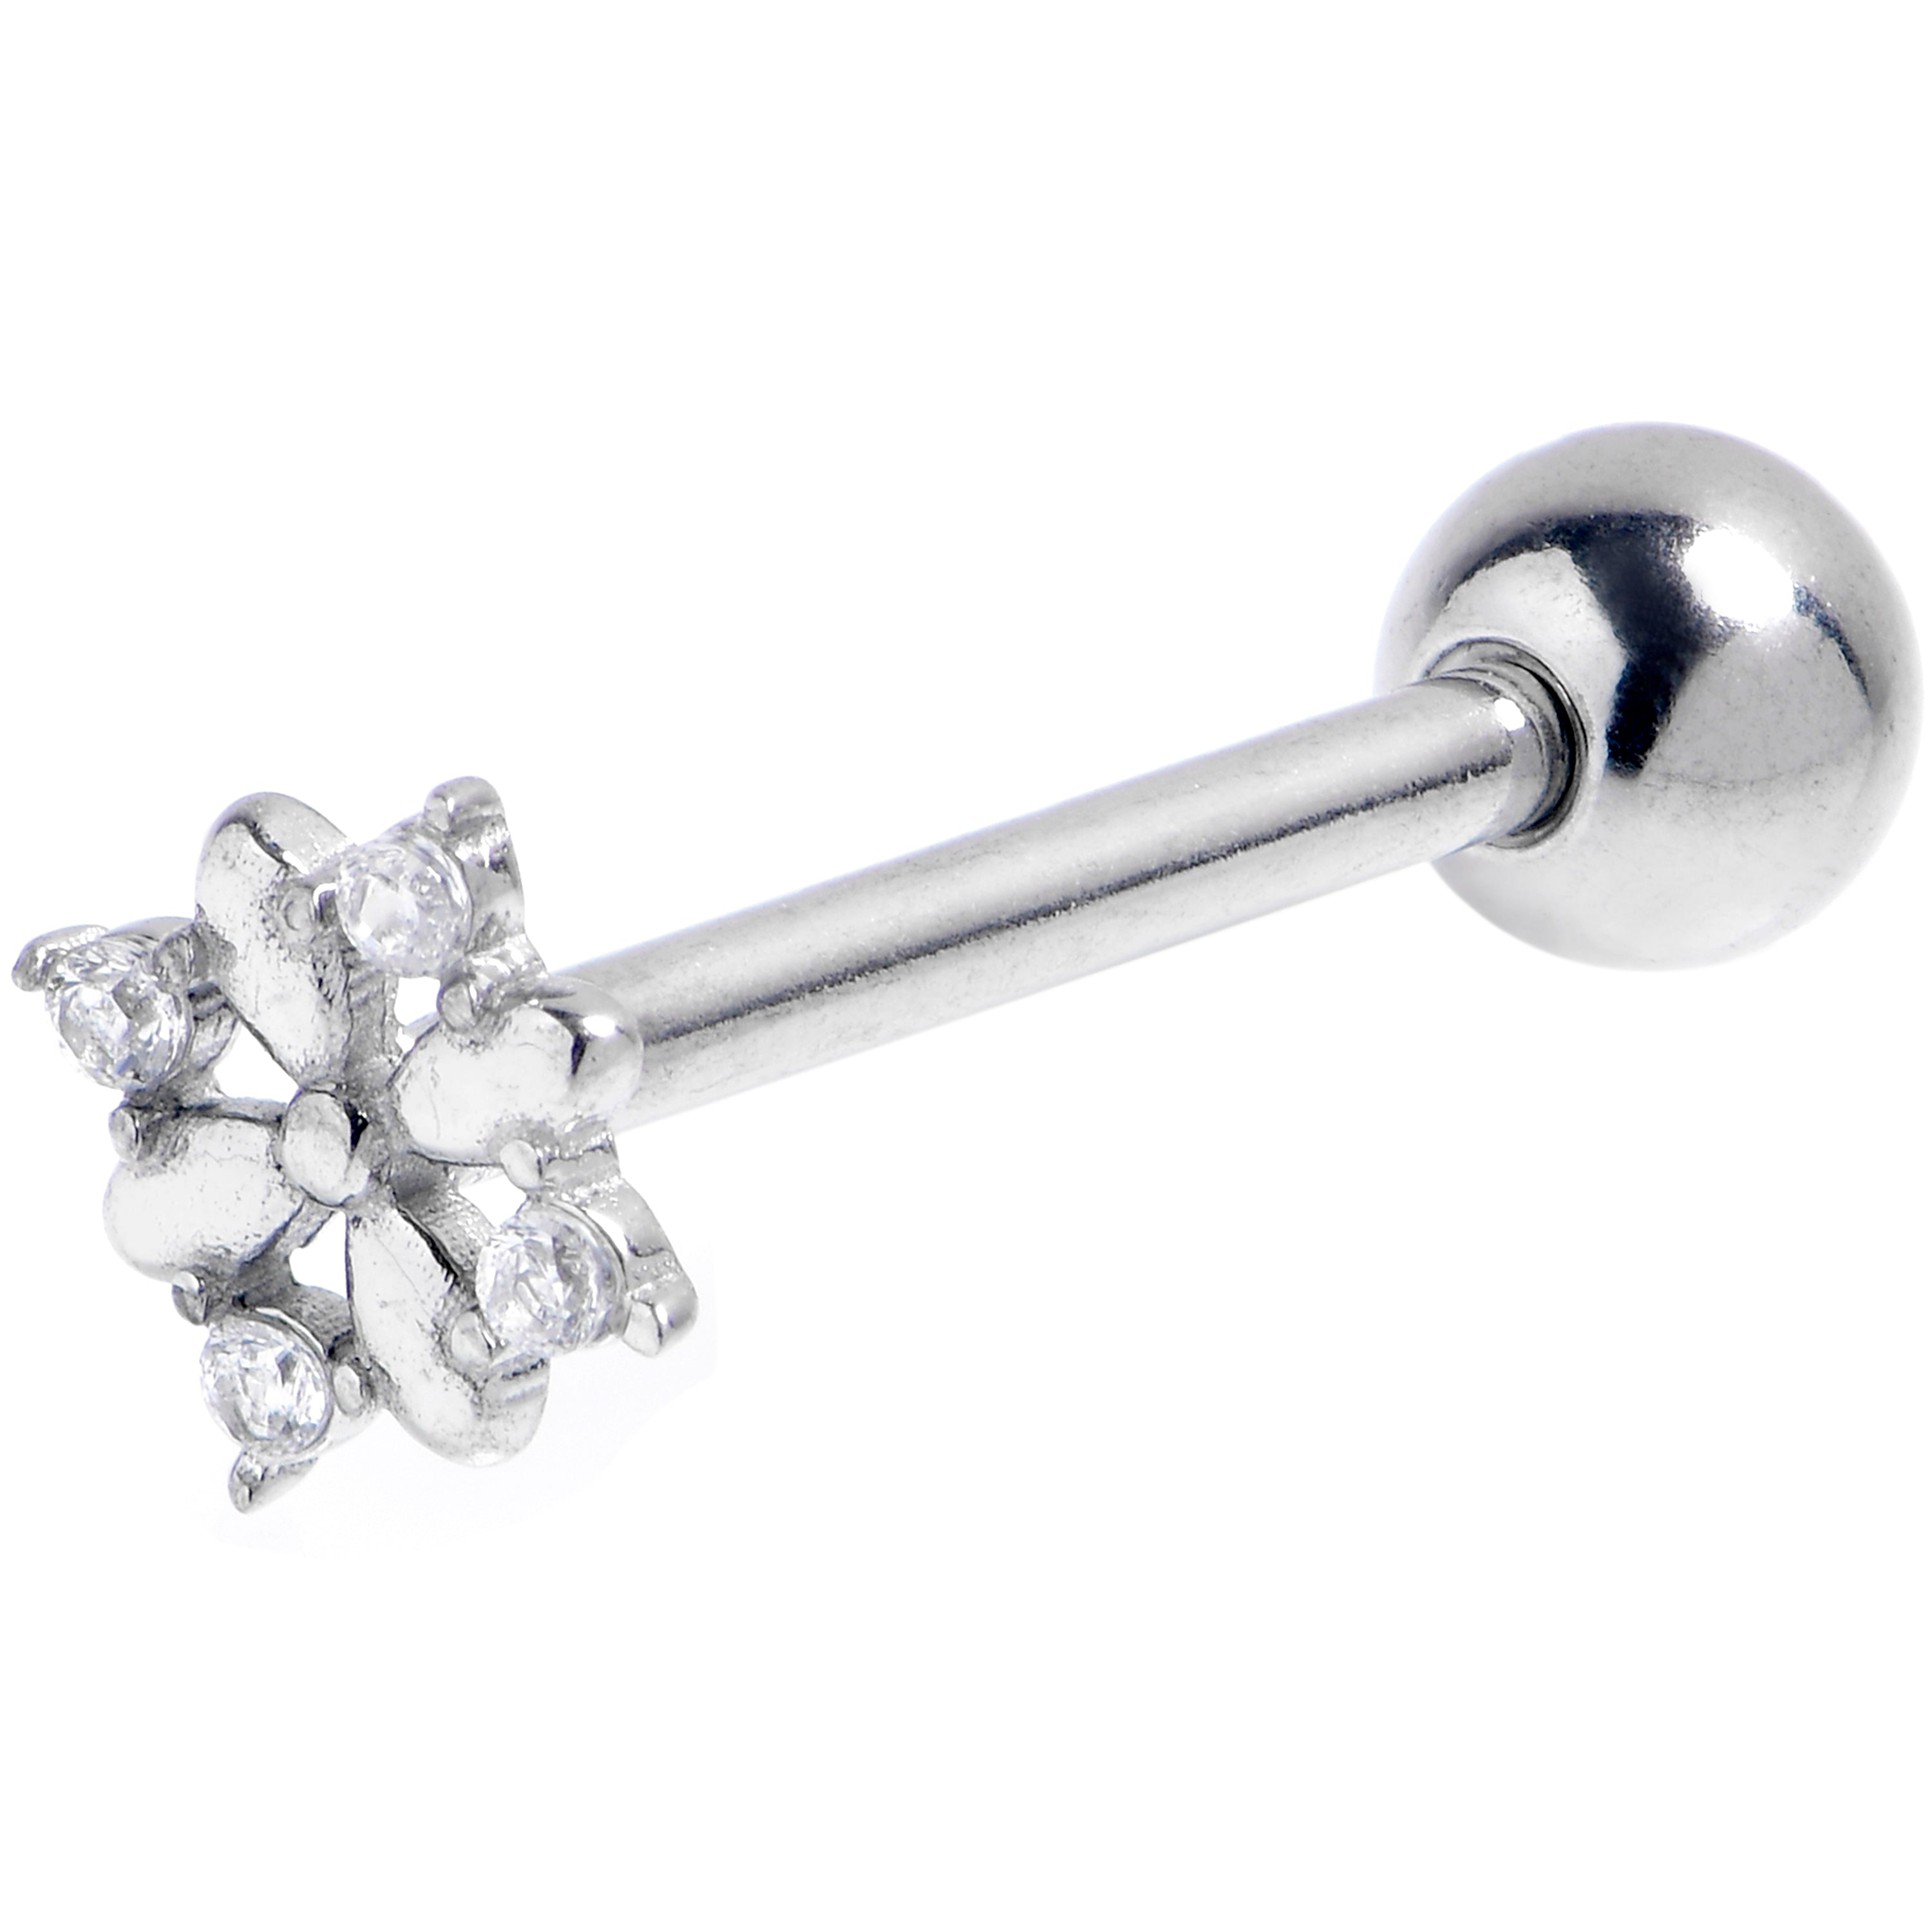 Clear CZ Gem Simply Starry Styled Barbell Tongue Ring